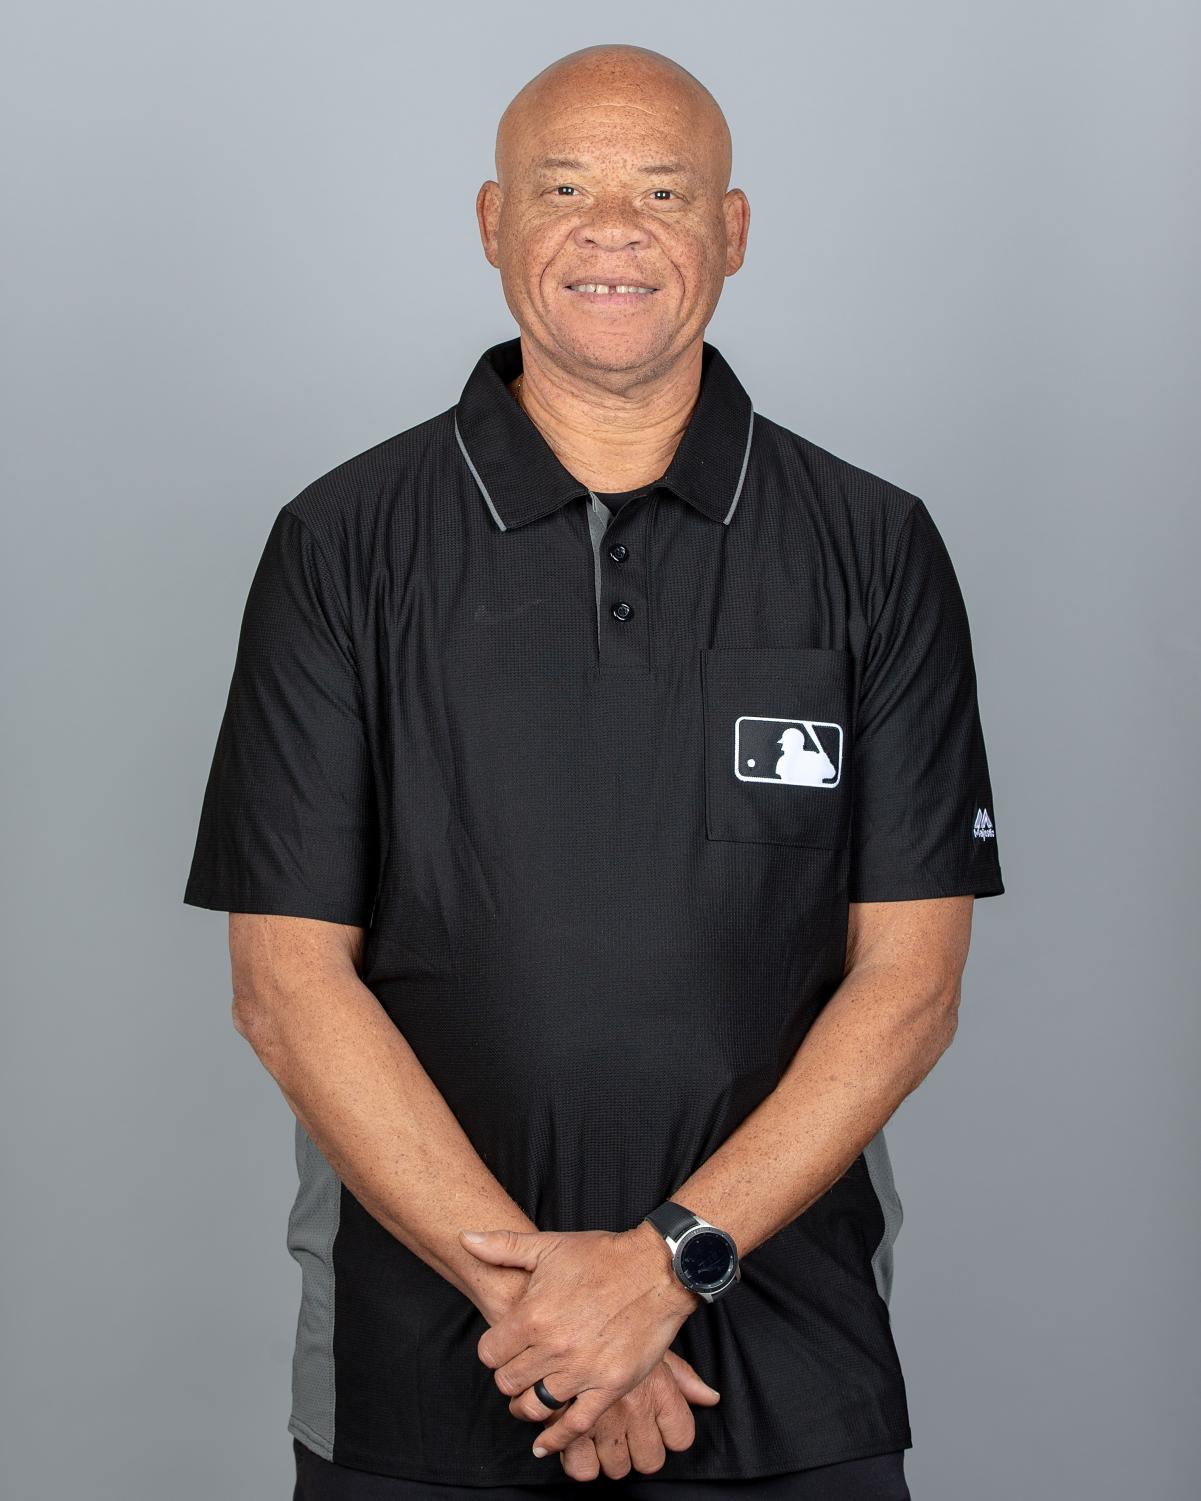 Kerwin Danley named MLB's first black umpire crew chief - Sports Illustrated